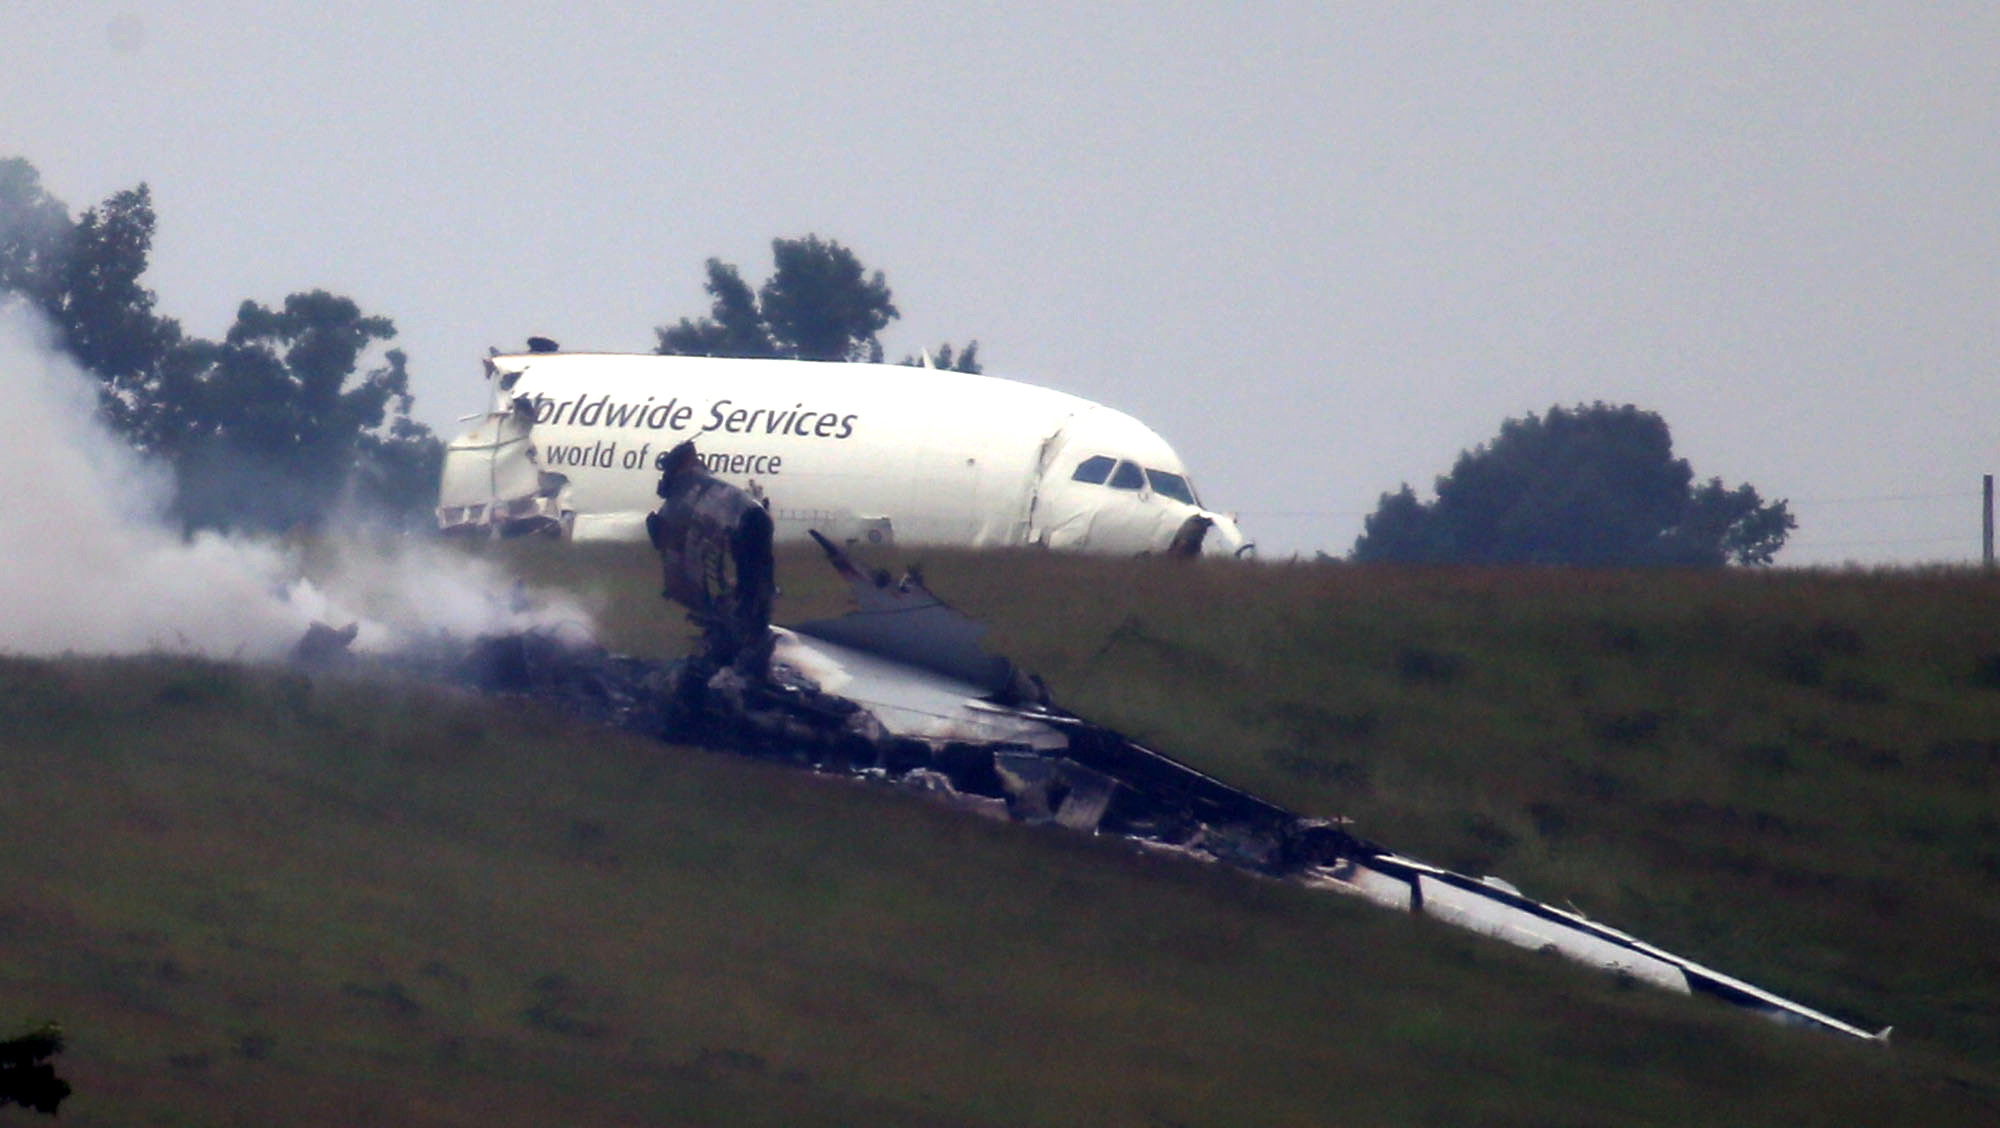 Debris burns as the broken fusilage of an A300 cargo plane lies on a hill at Birmingham-Shuttlesworth International Airport after crashing on approach Wednesday morning in Birmingham, Ala.